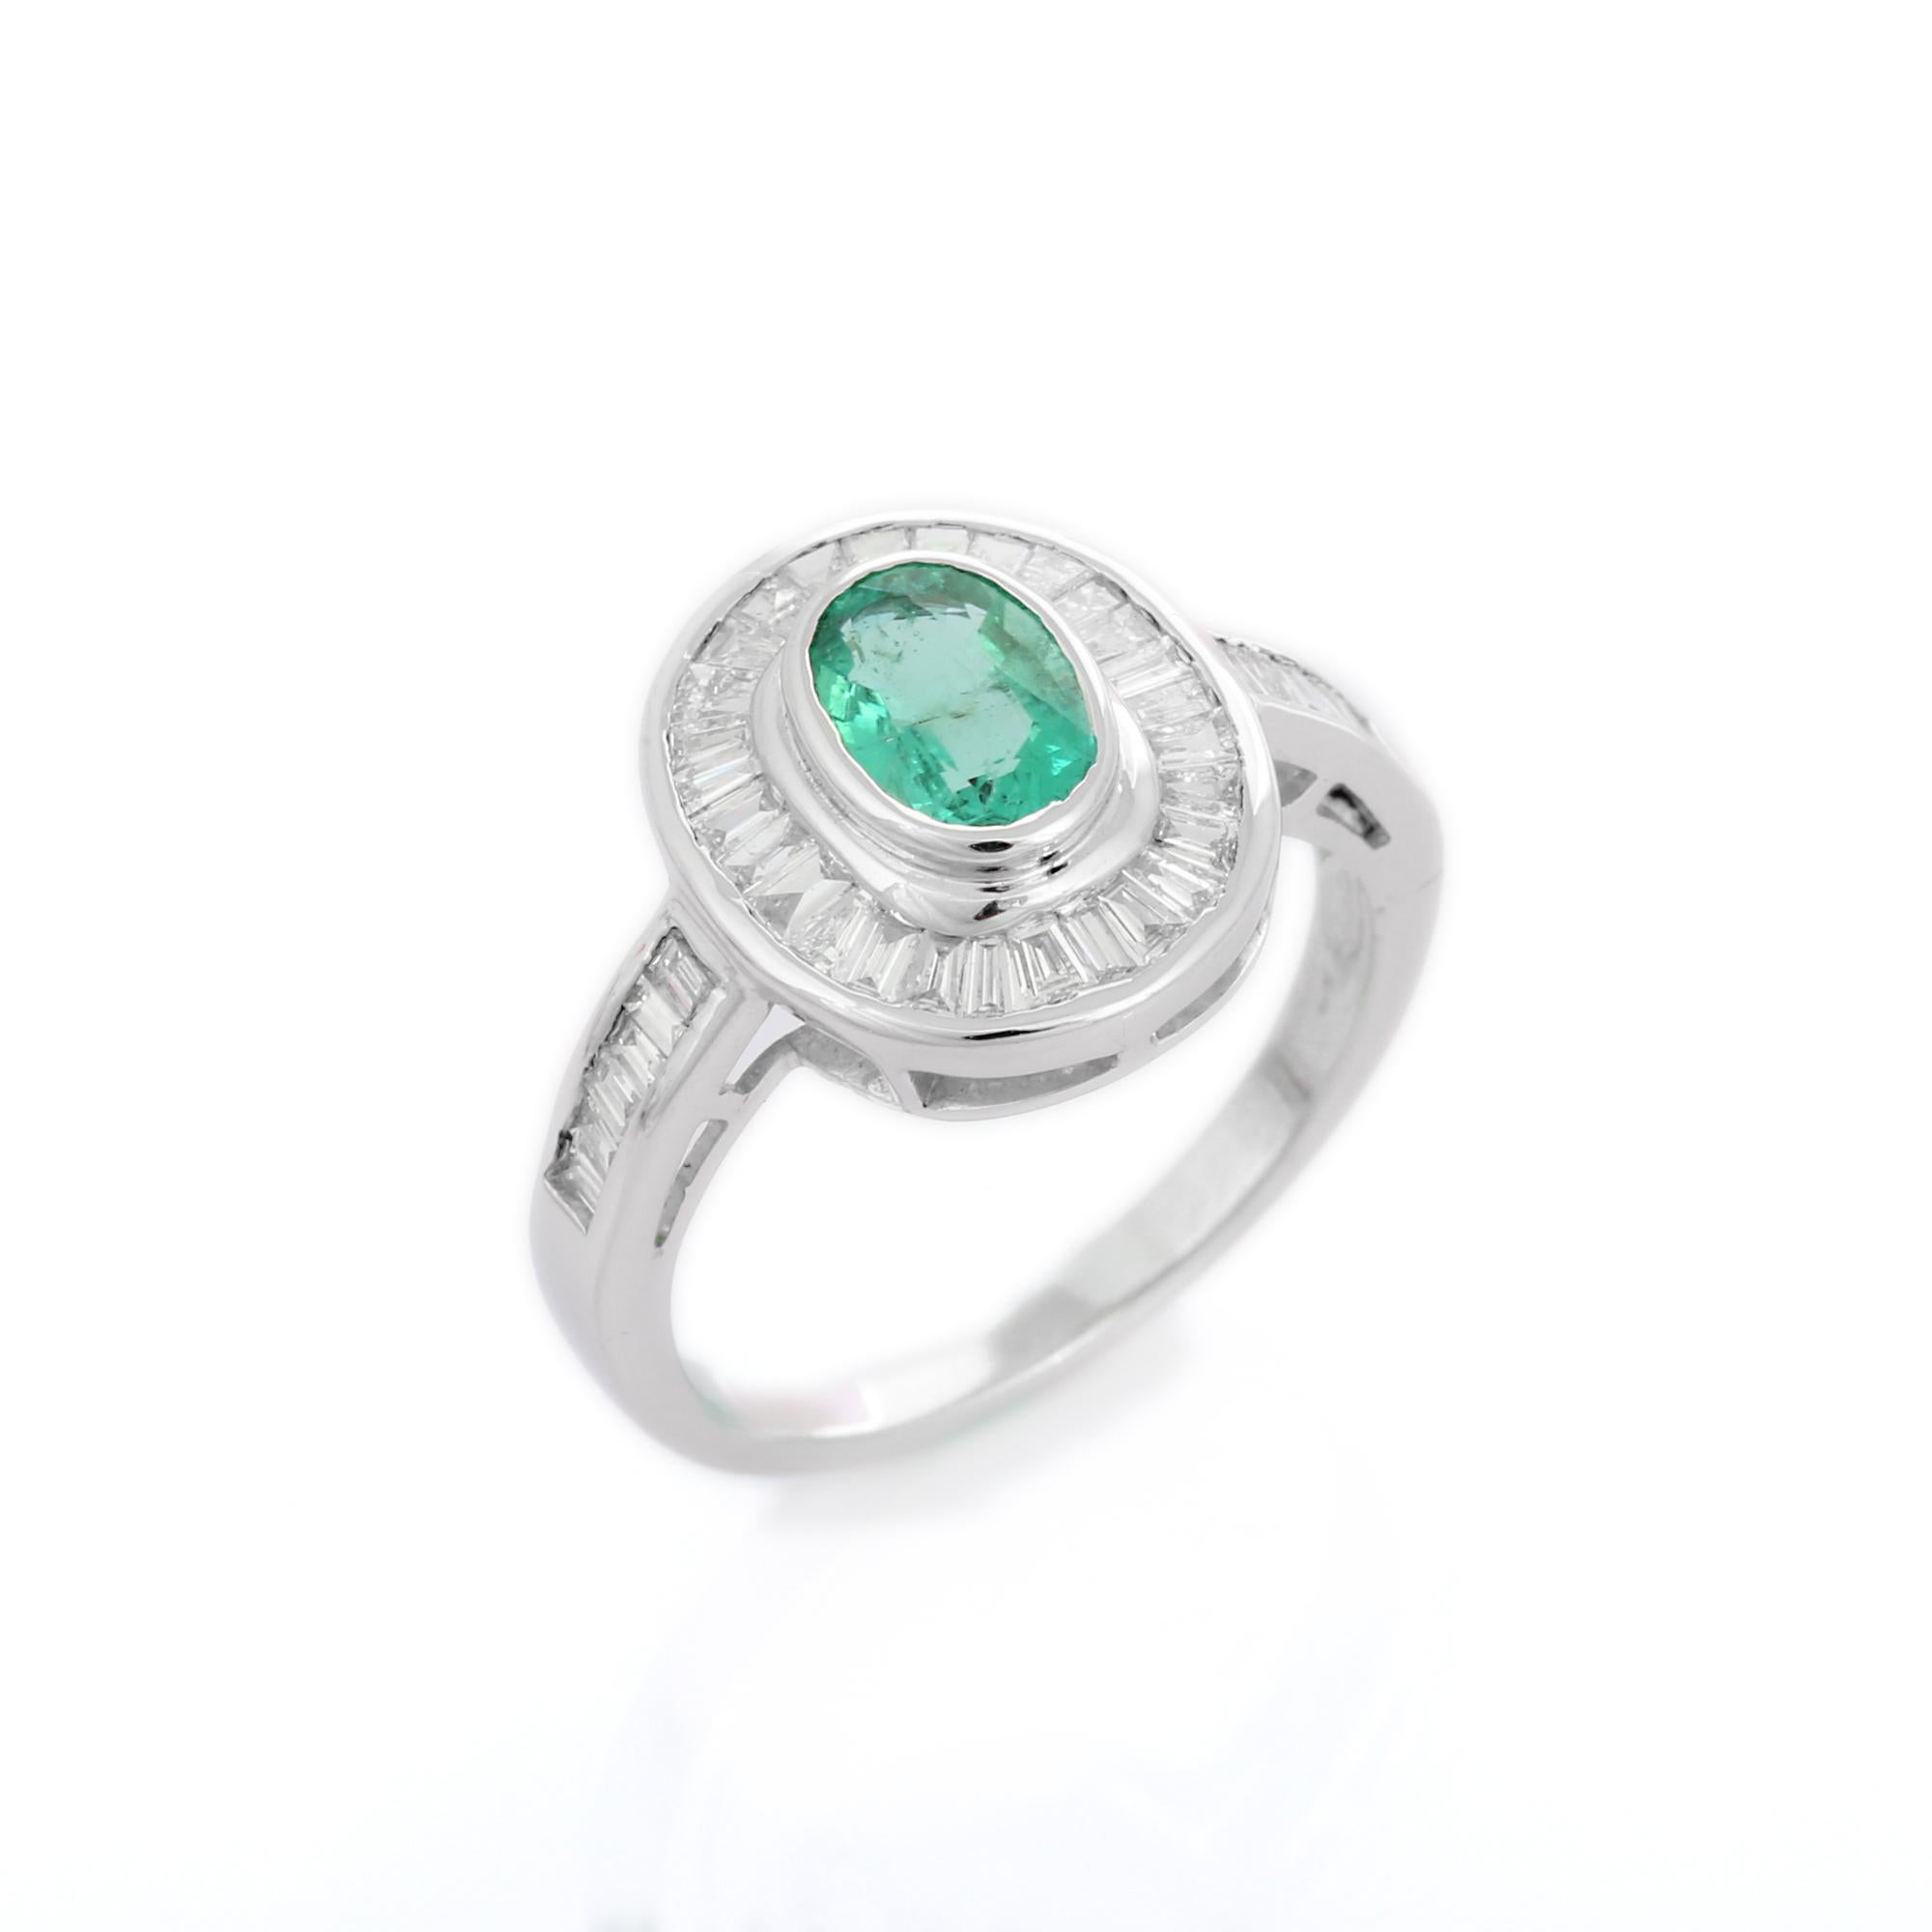 For Sale:  1.56 Carat Emerald Cocktail Ring with Halo of Diamonds in 18K White Gold  8